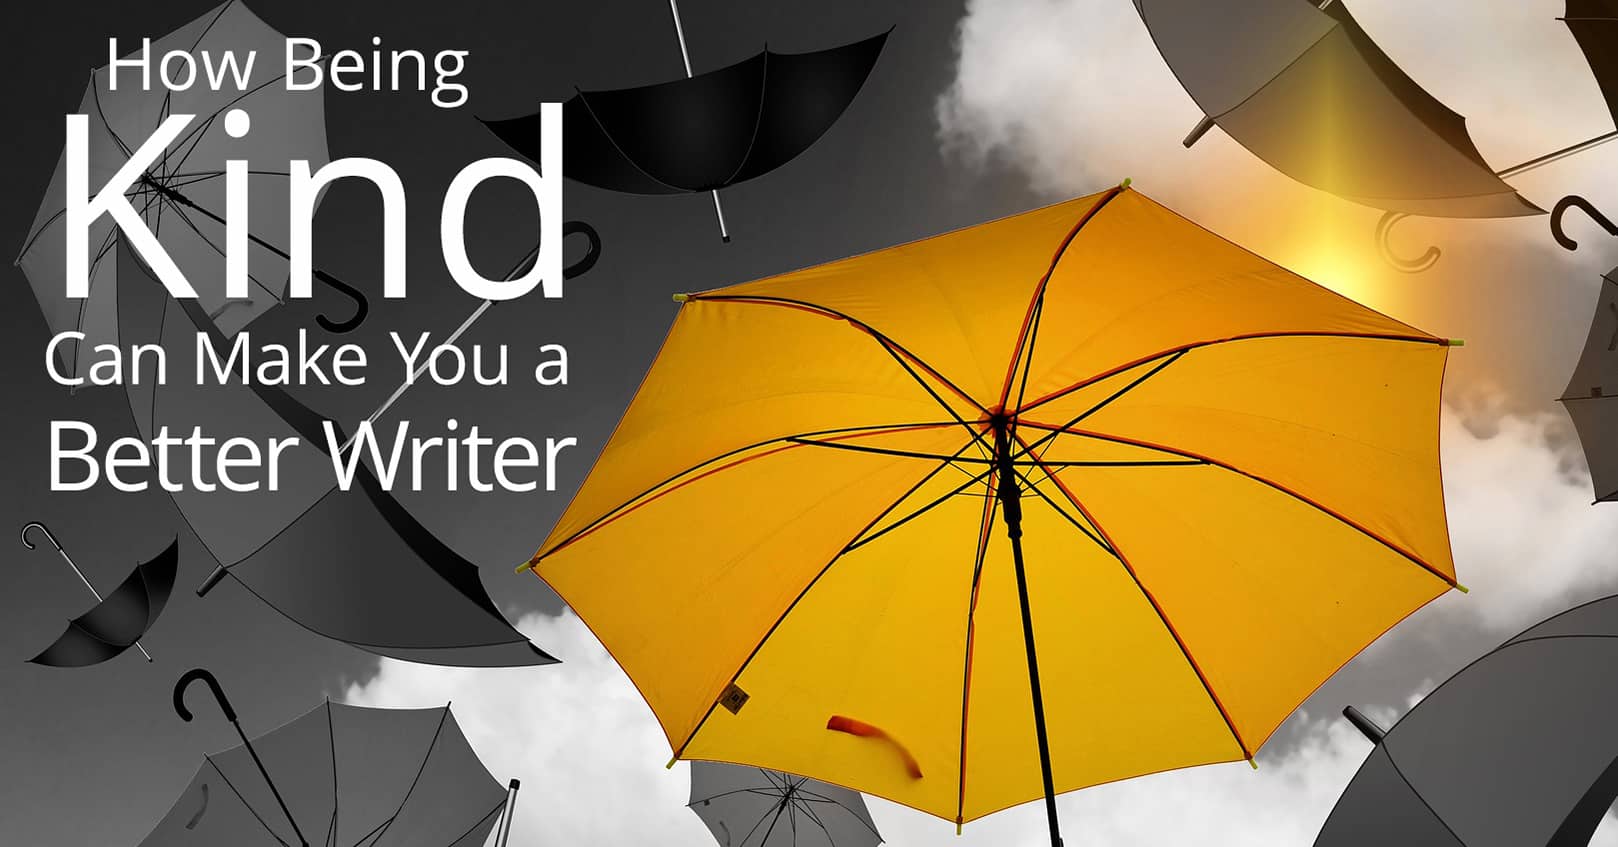 being kind makes you a better writer - kindness is a yellow umbrella